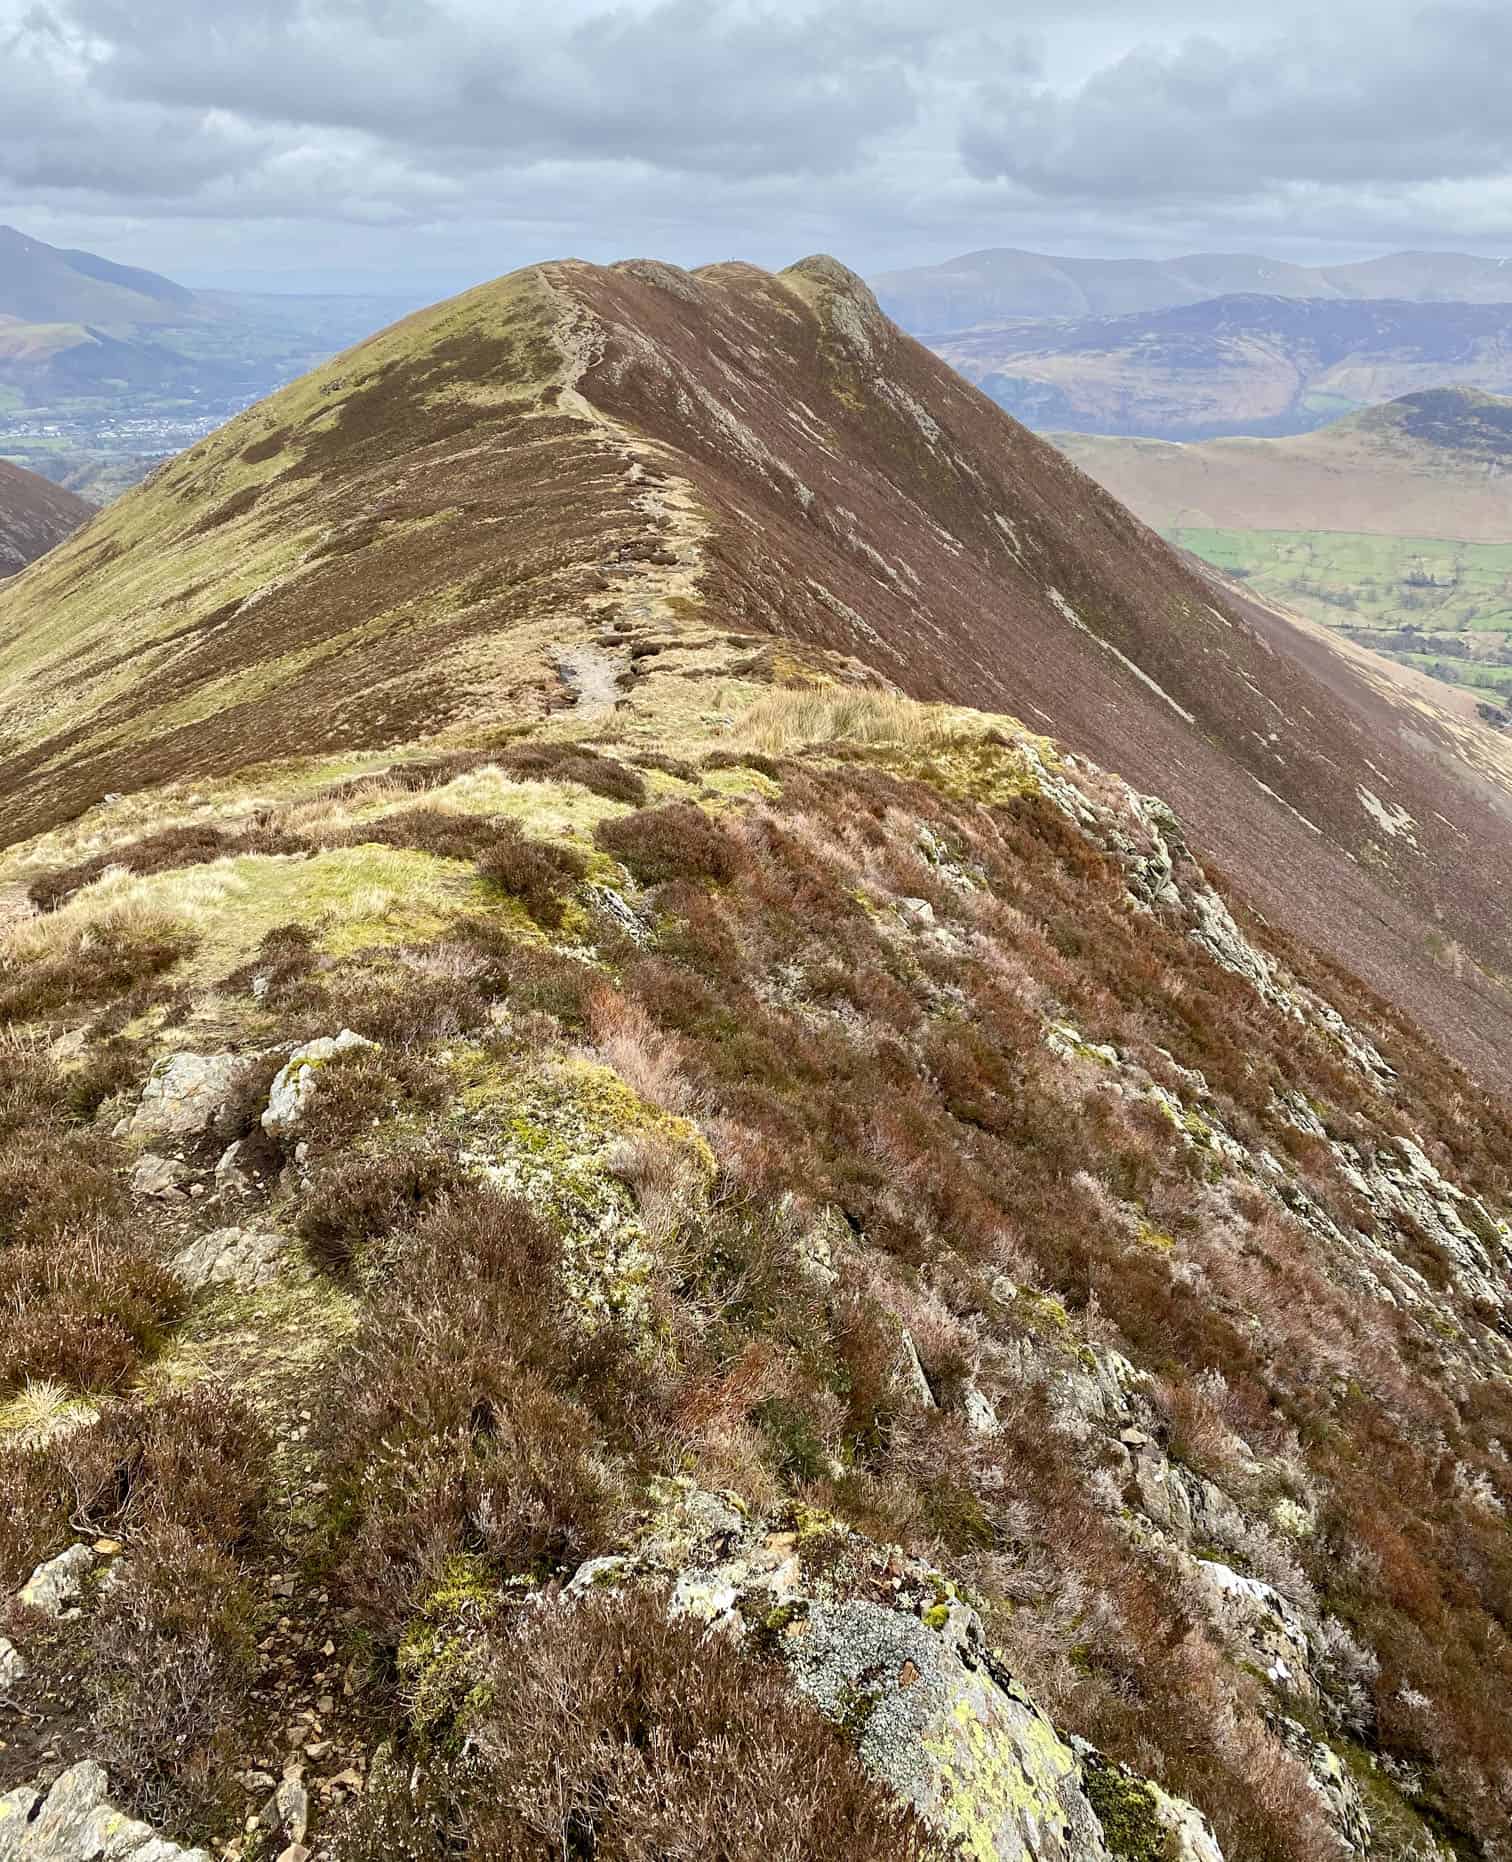 A quick look back at Causey Pike from the footpath above Scar Crags.